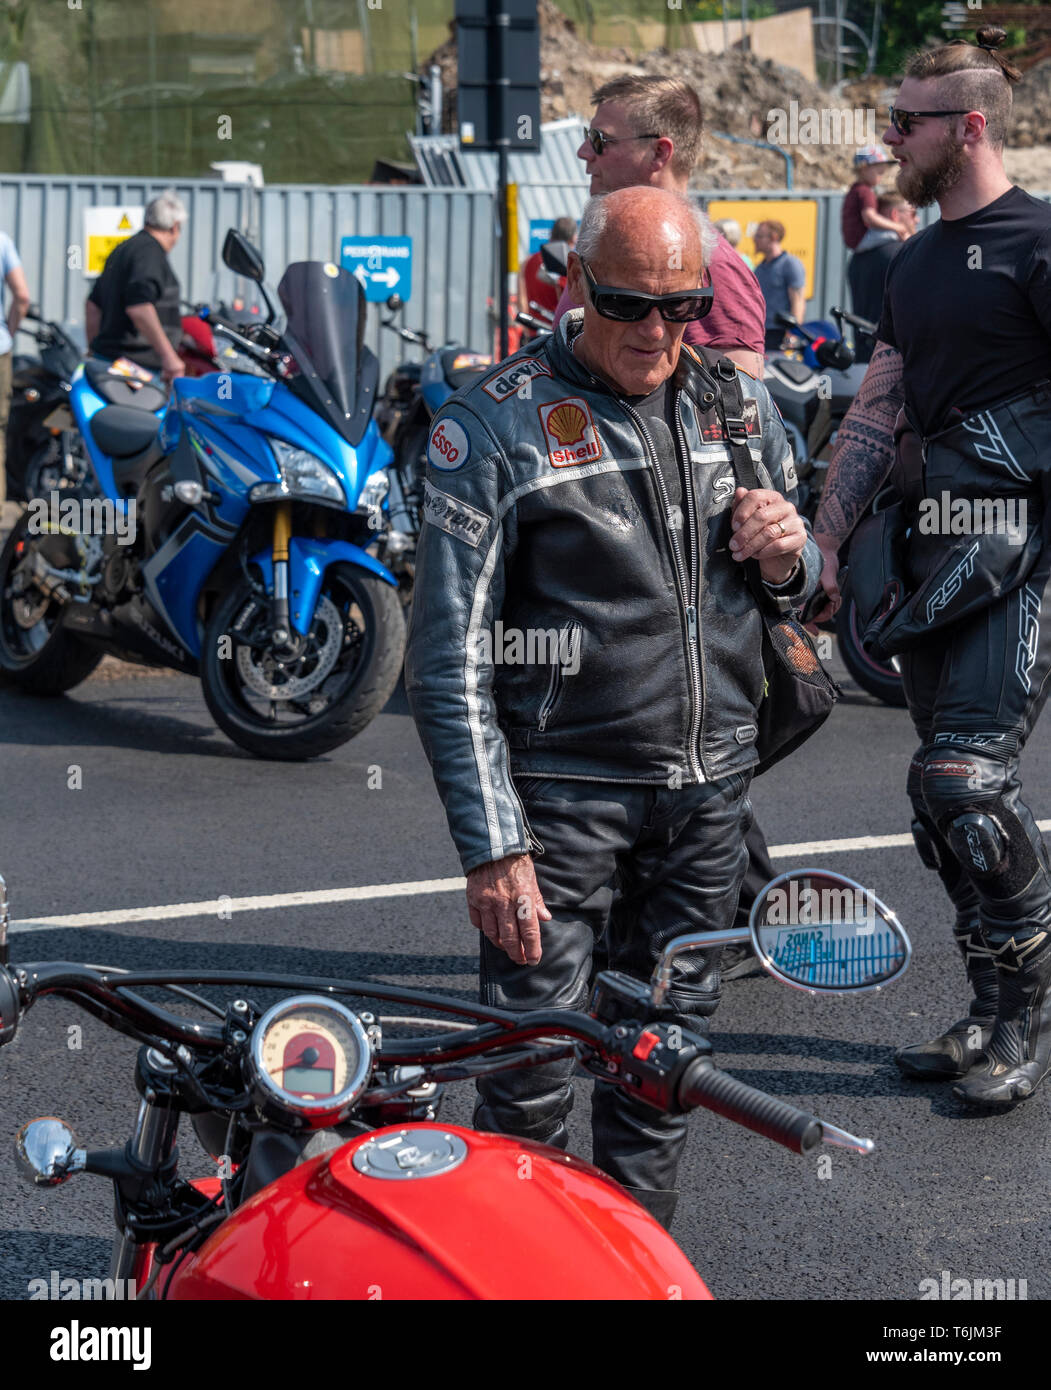 Southend shakedown motorcycle meet organised by the Ace cafe. Easter Bank holiday Monday. Stock Photo